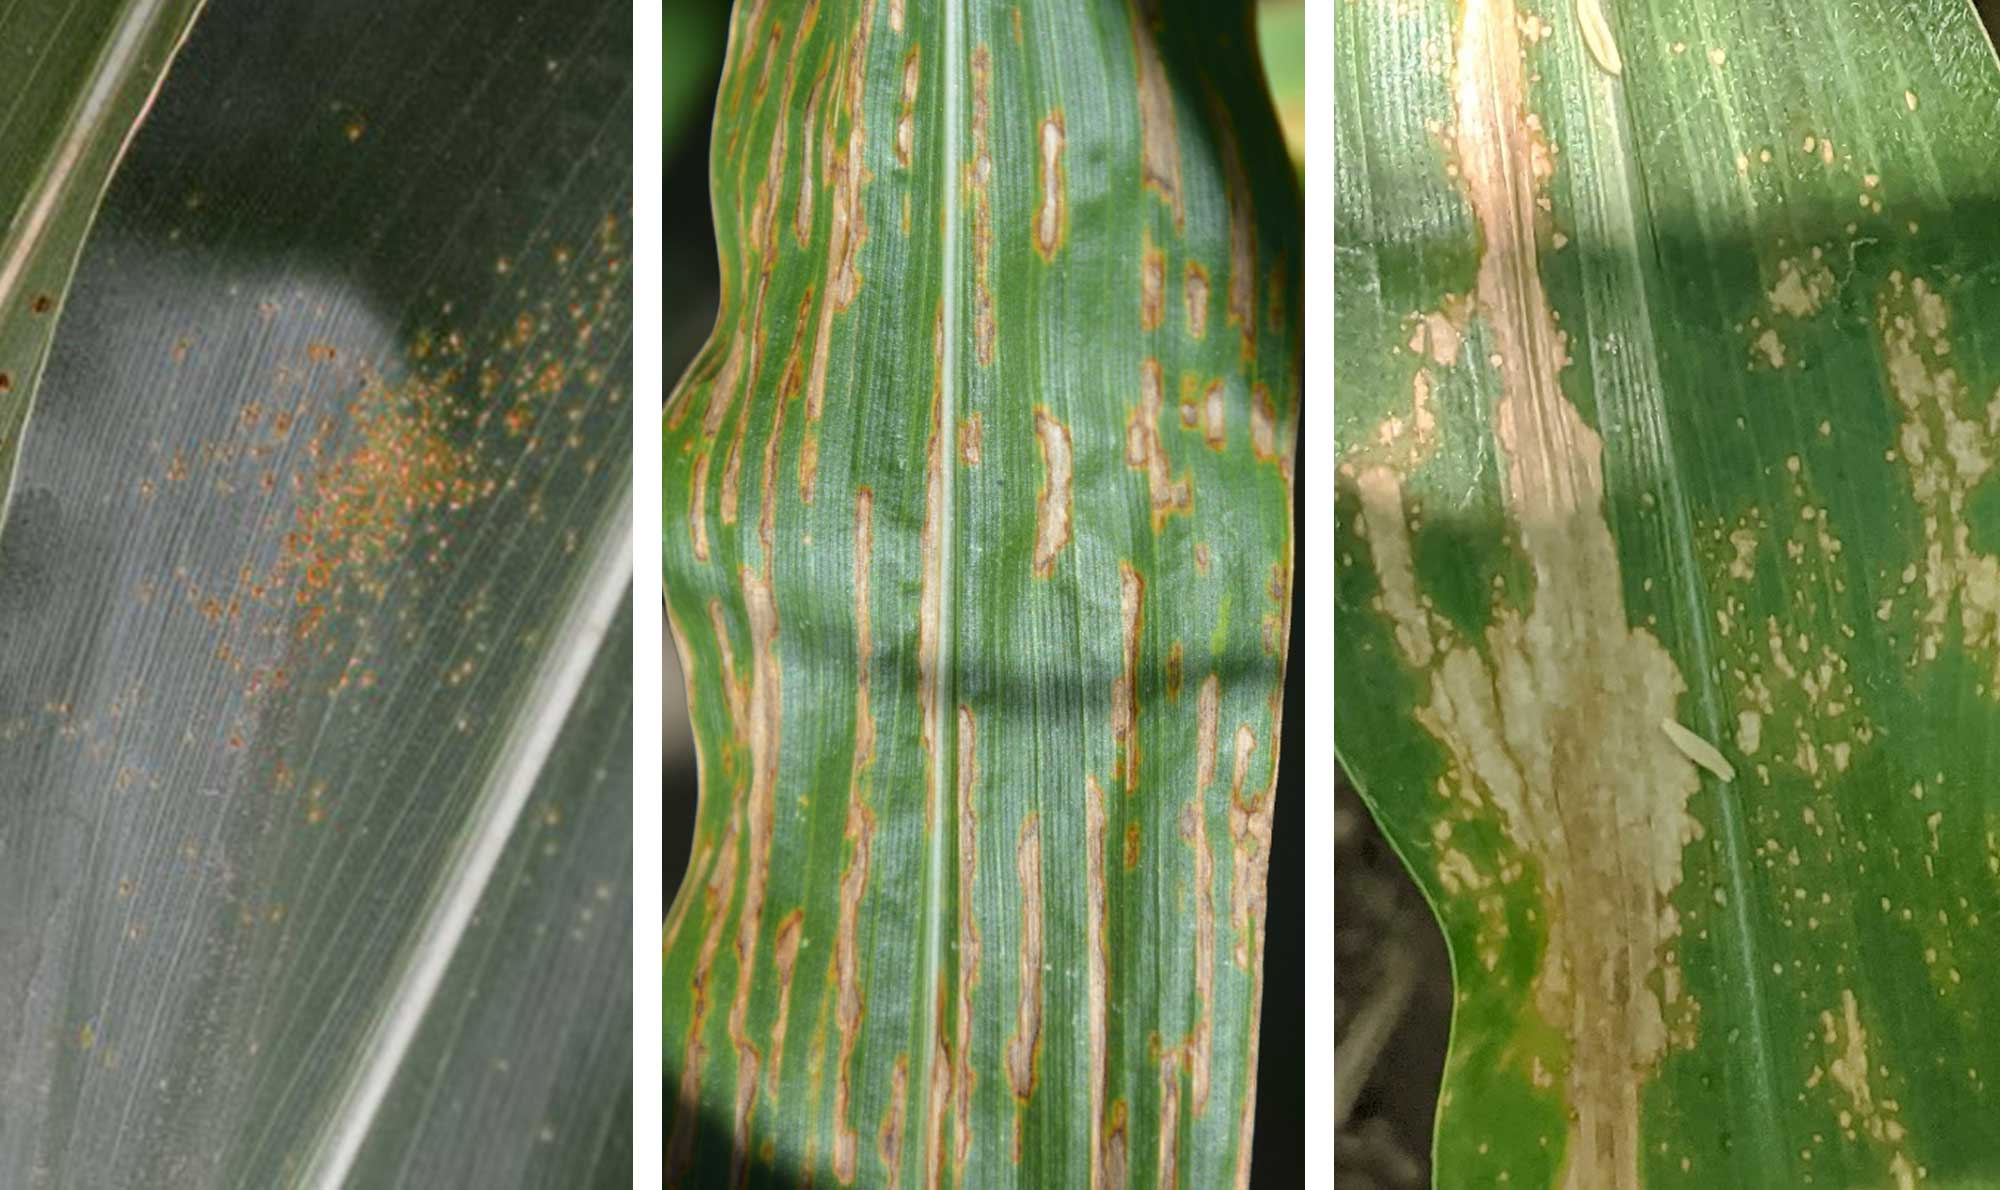 Three corn diseases. From left: Southern Rust, Bacterial Leaf Streak, and Eyespot.